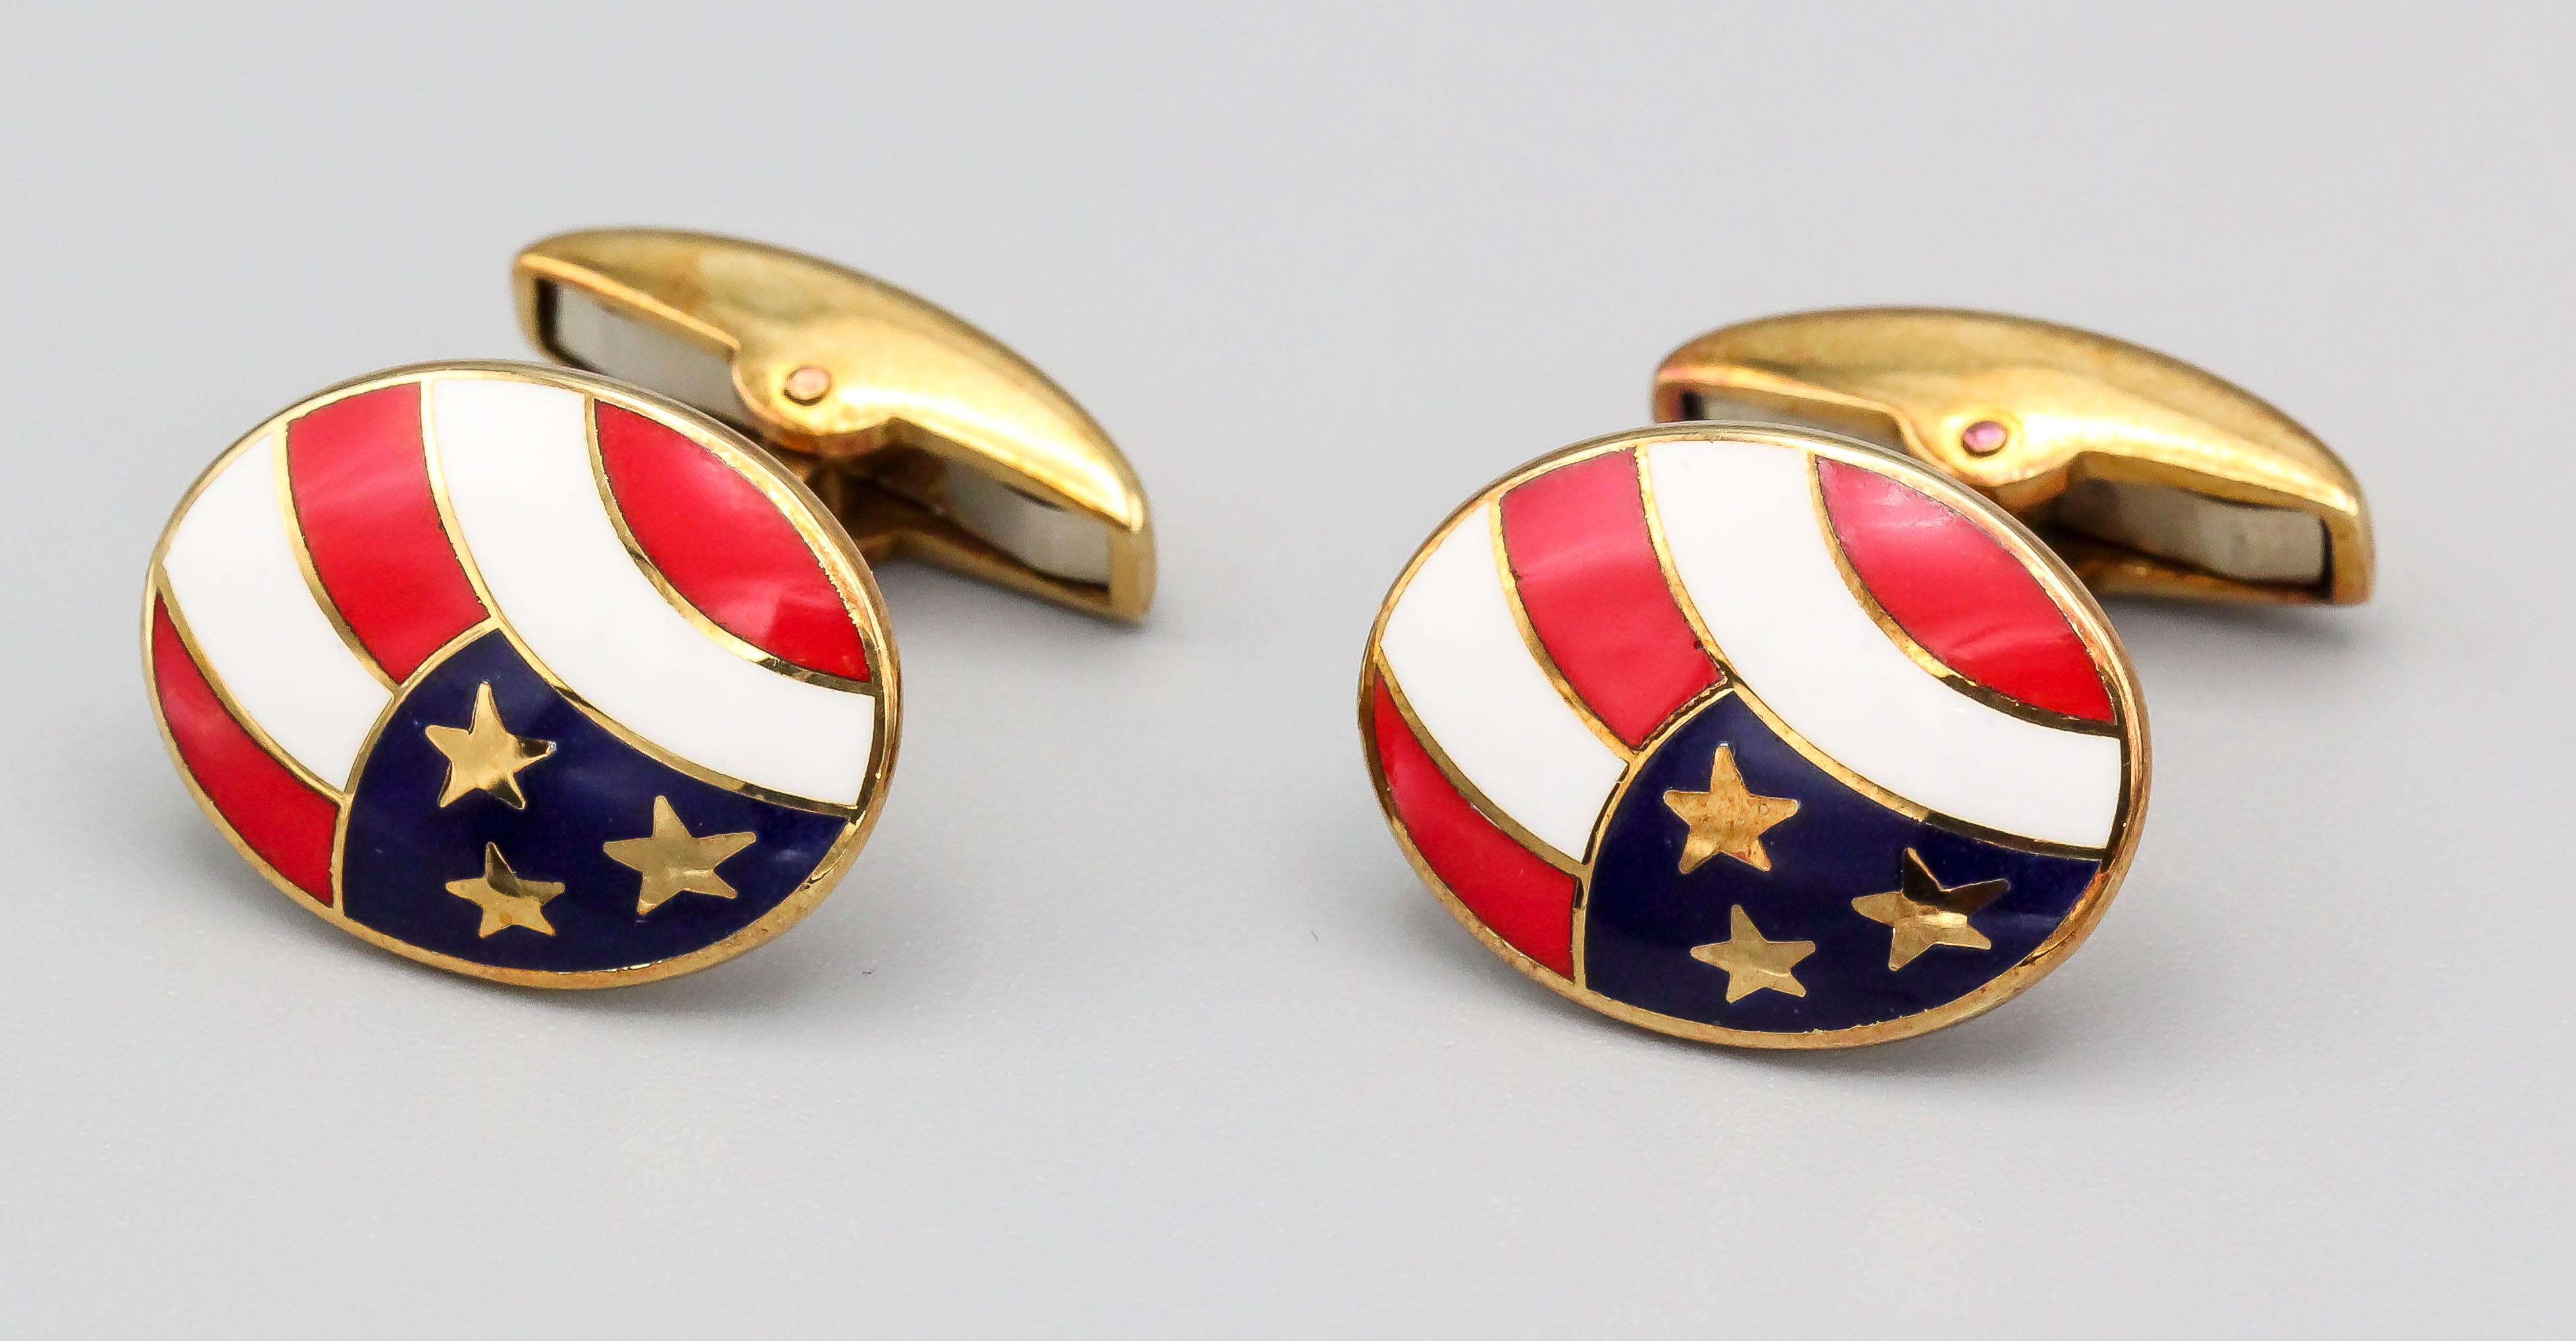 Handsome enamel and 18K yellow gold cufflinks by Deakin & Francis. They feature a stars and stripes enamel theme.

Hallmarks: D&F, 750, English standard marks